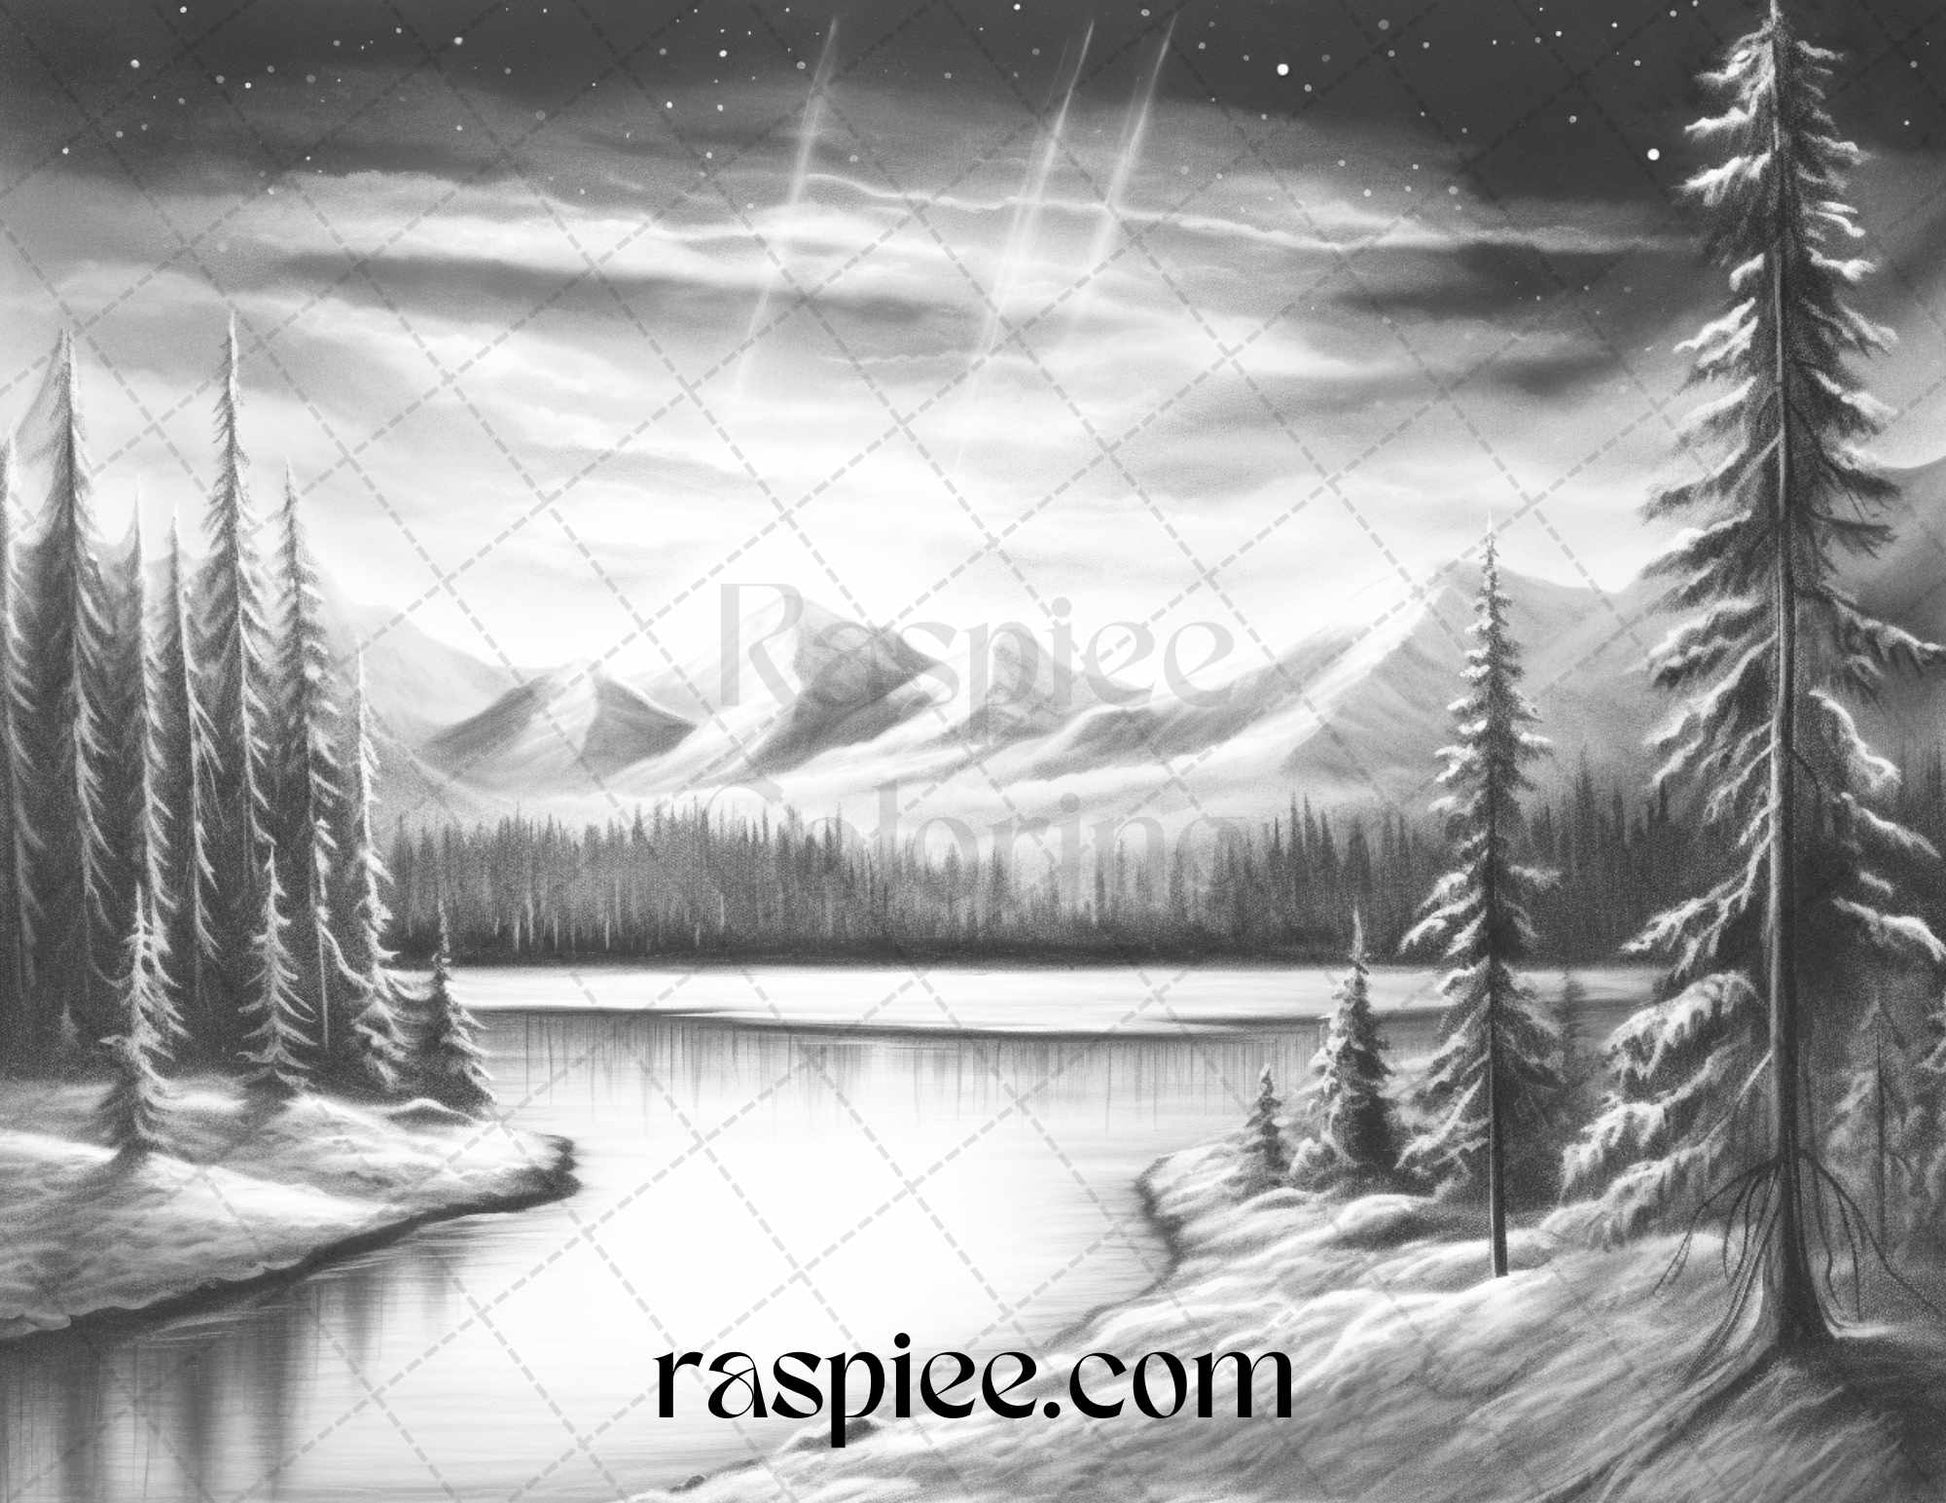 Aurora Borealis Landscape Coloring Page, Printable Adult Grayscale Coloring Sheet, Nordic Nature Scene Black and White Art, Relaxing Coloring Page for Adults, Digital Download Printable Coloring Book, Serene Winter Night Sky Coloring, Tranquil Scandinavian Grayscale Art